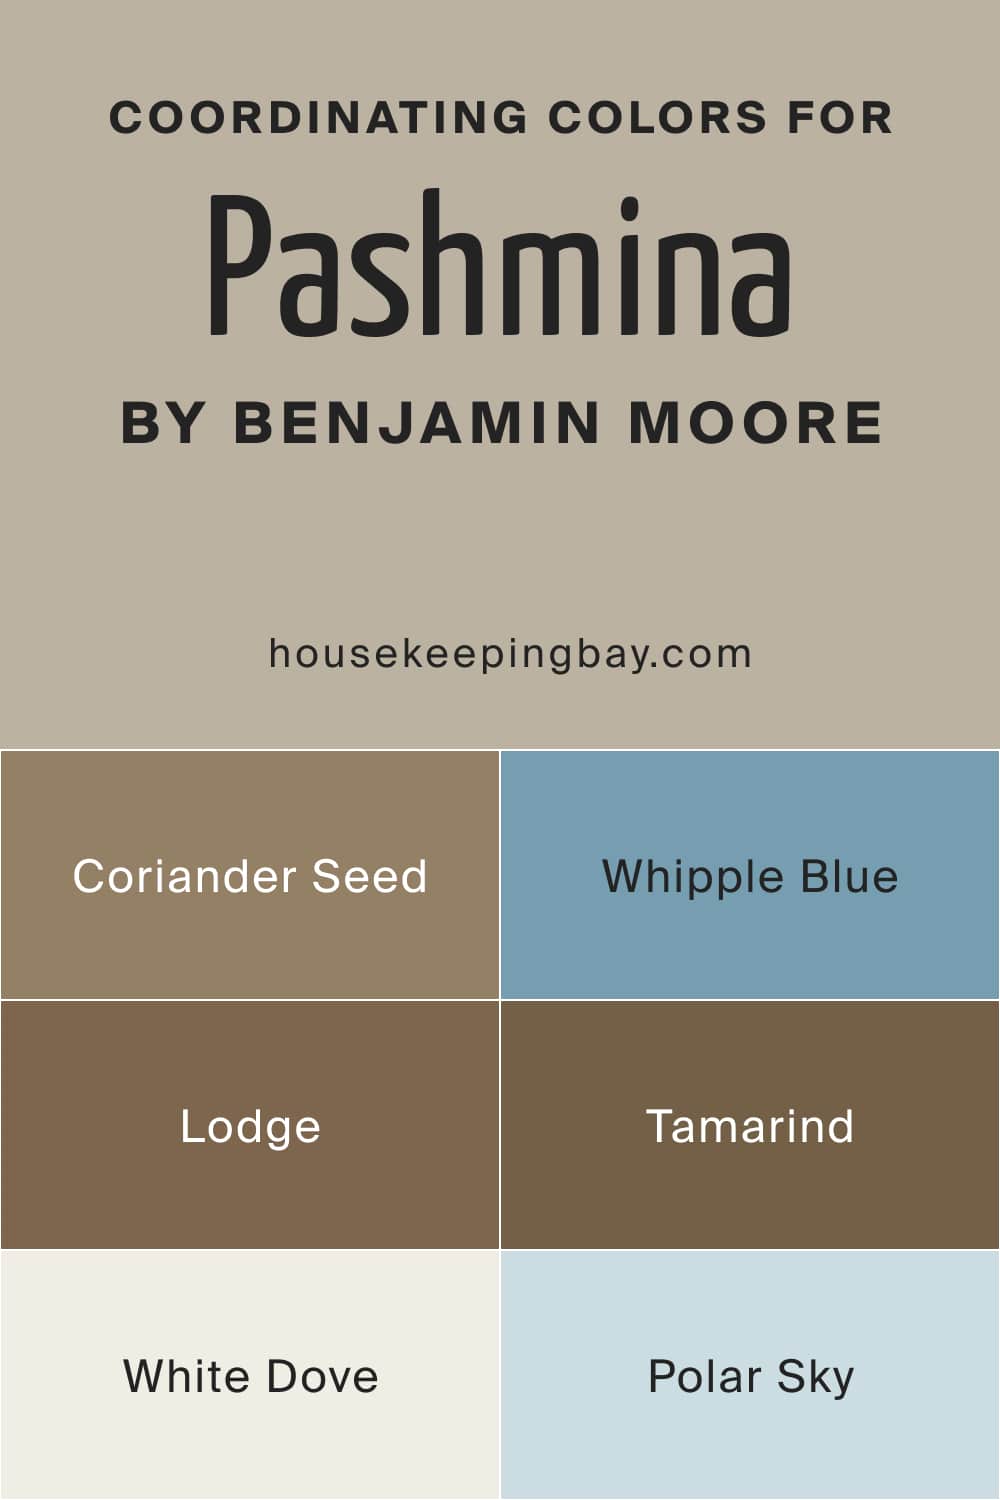 Coordinating Colors for Pashmina AF 100 by Benjamin Moore